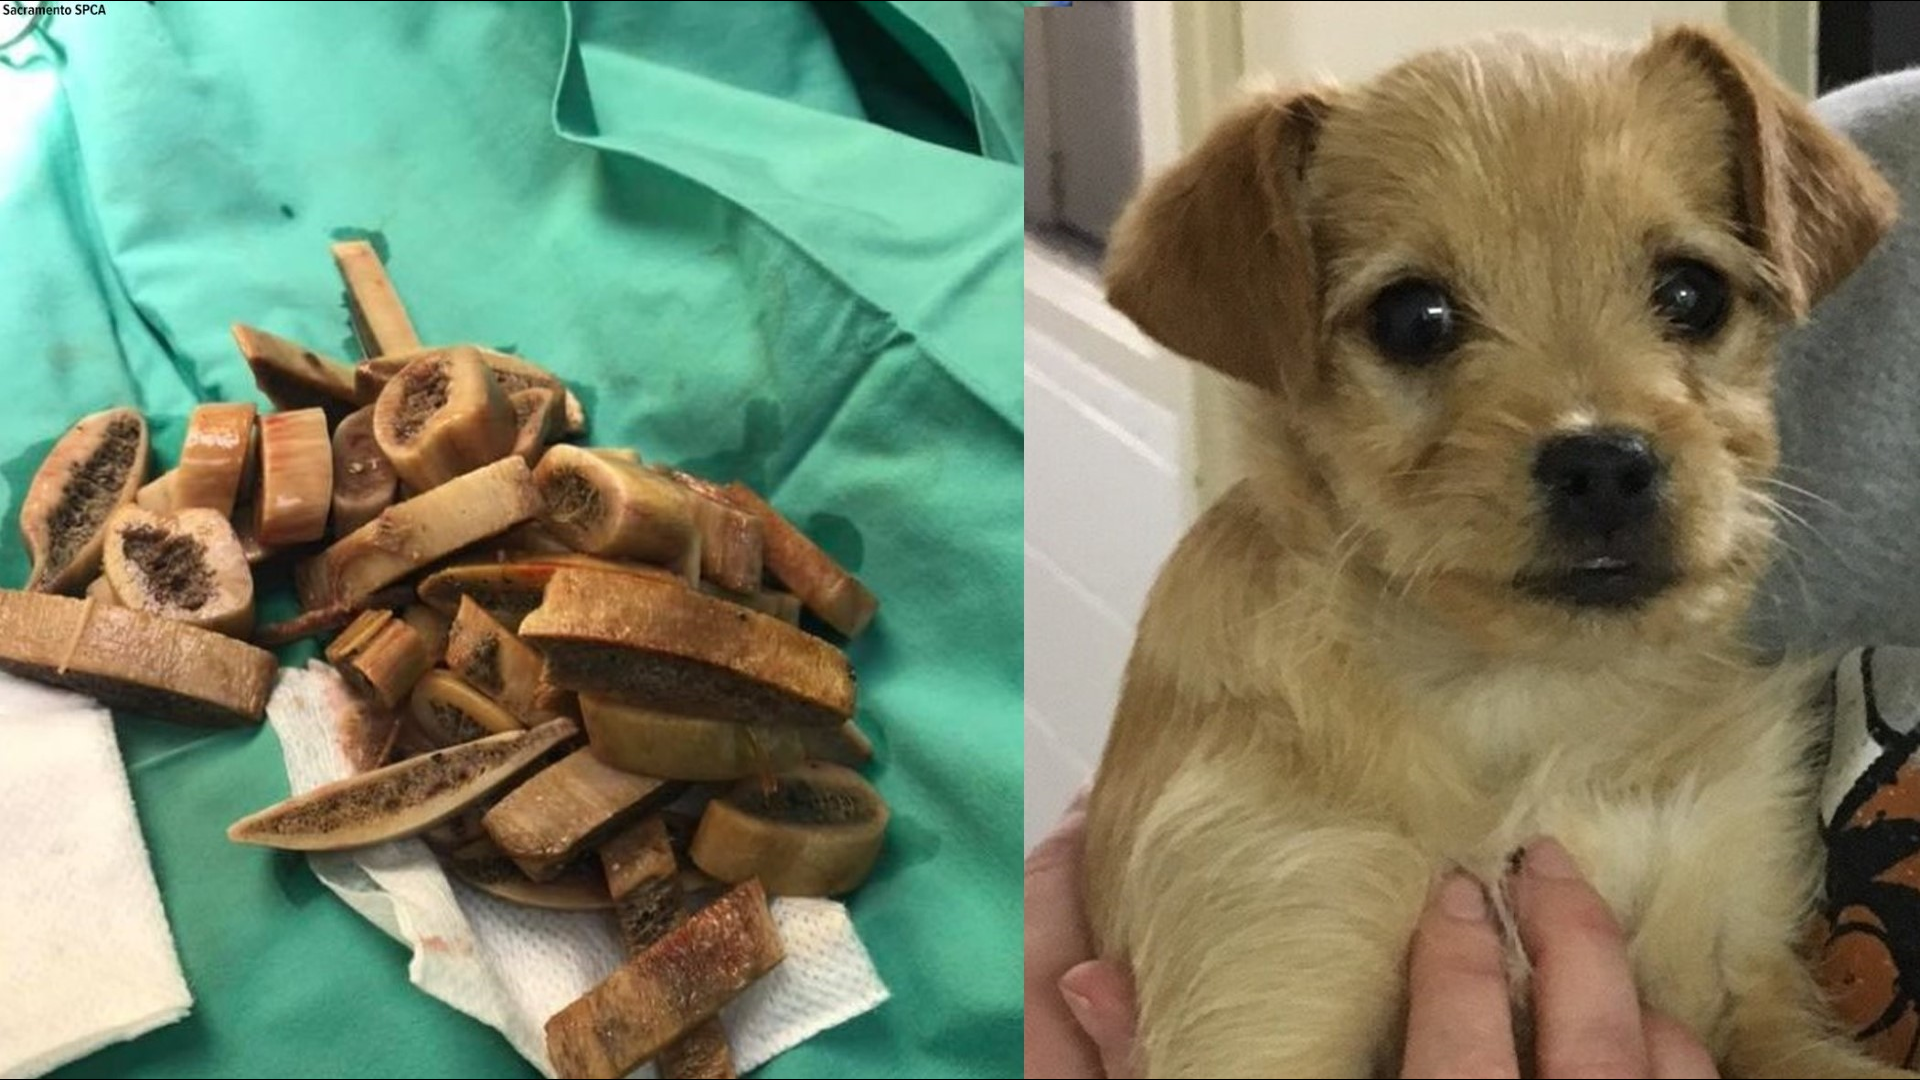 A three-month-old puppy weighing only 6 pounds  had to have emergency surgery to remove the ribs from his stomach and intestines.